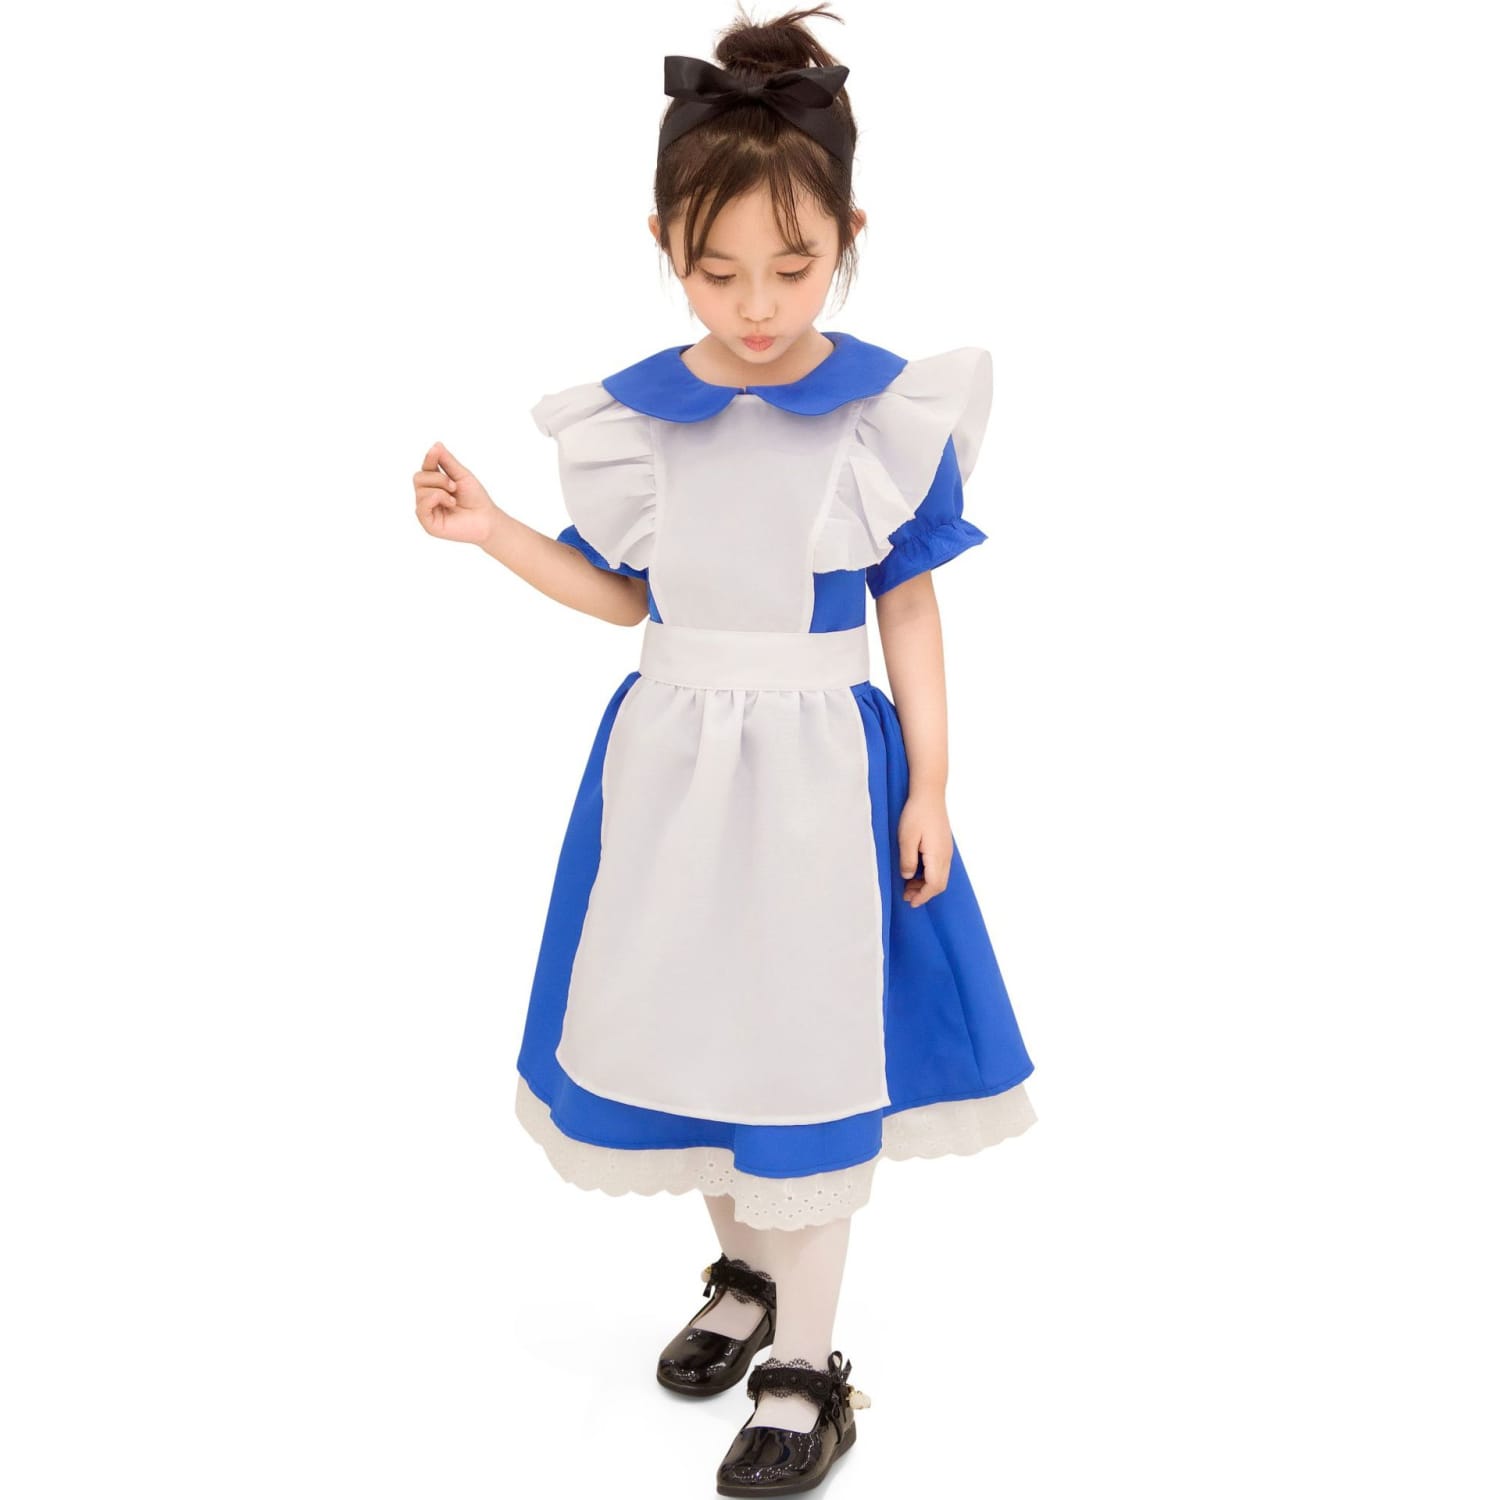 Cute Maid Role Play Costume for Children